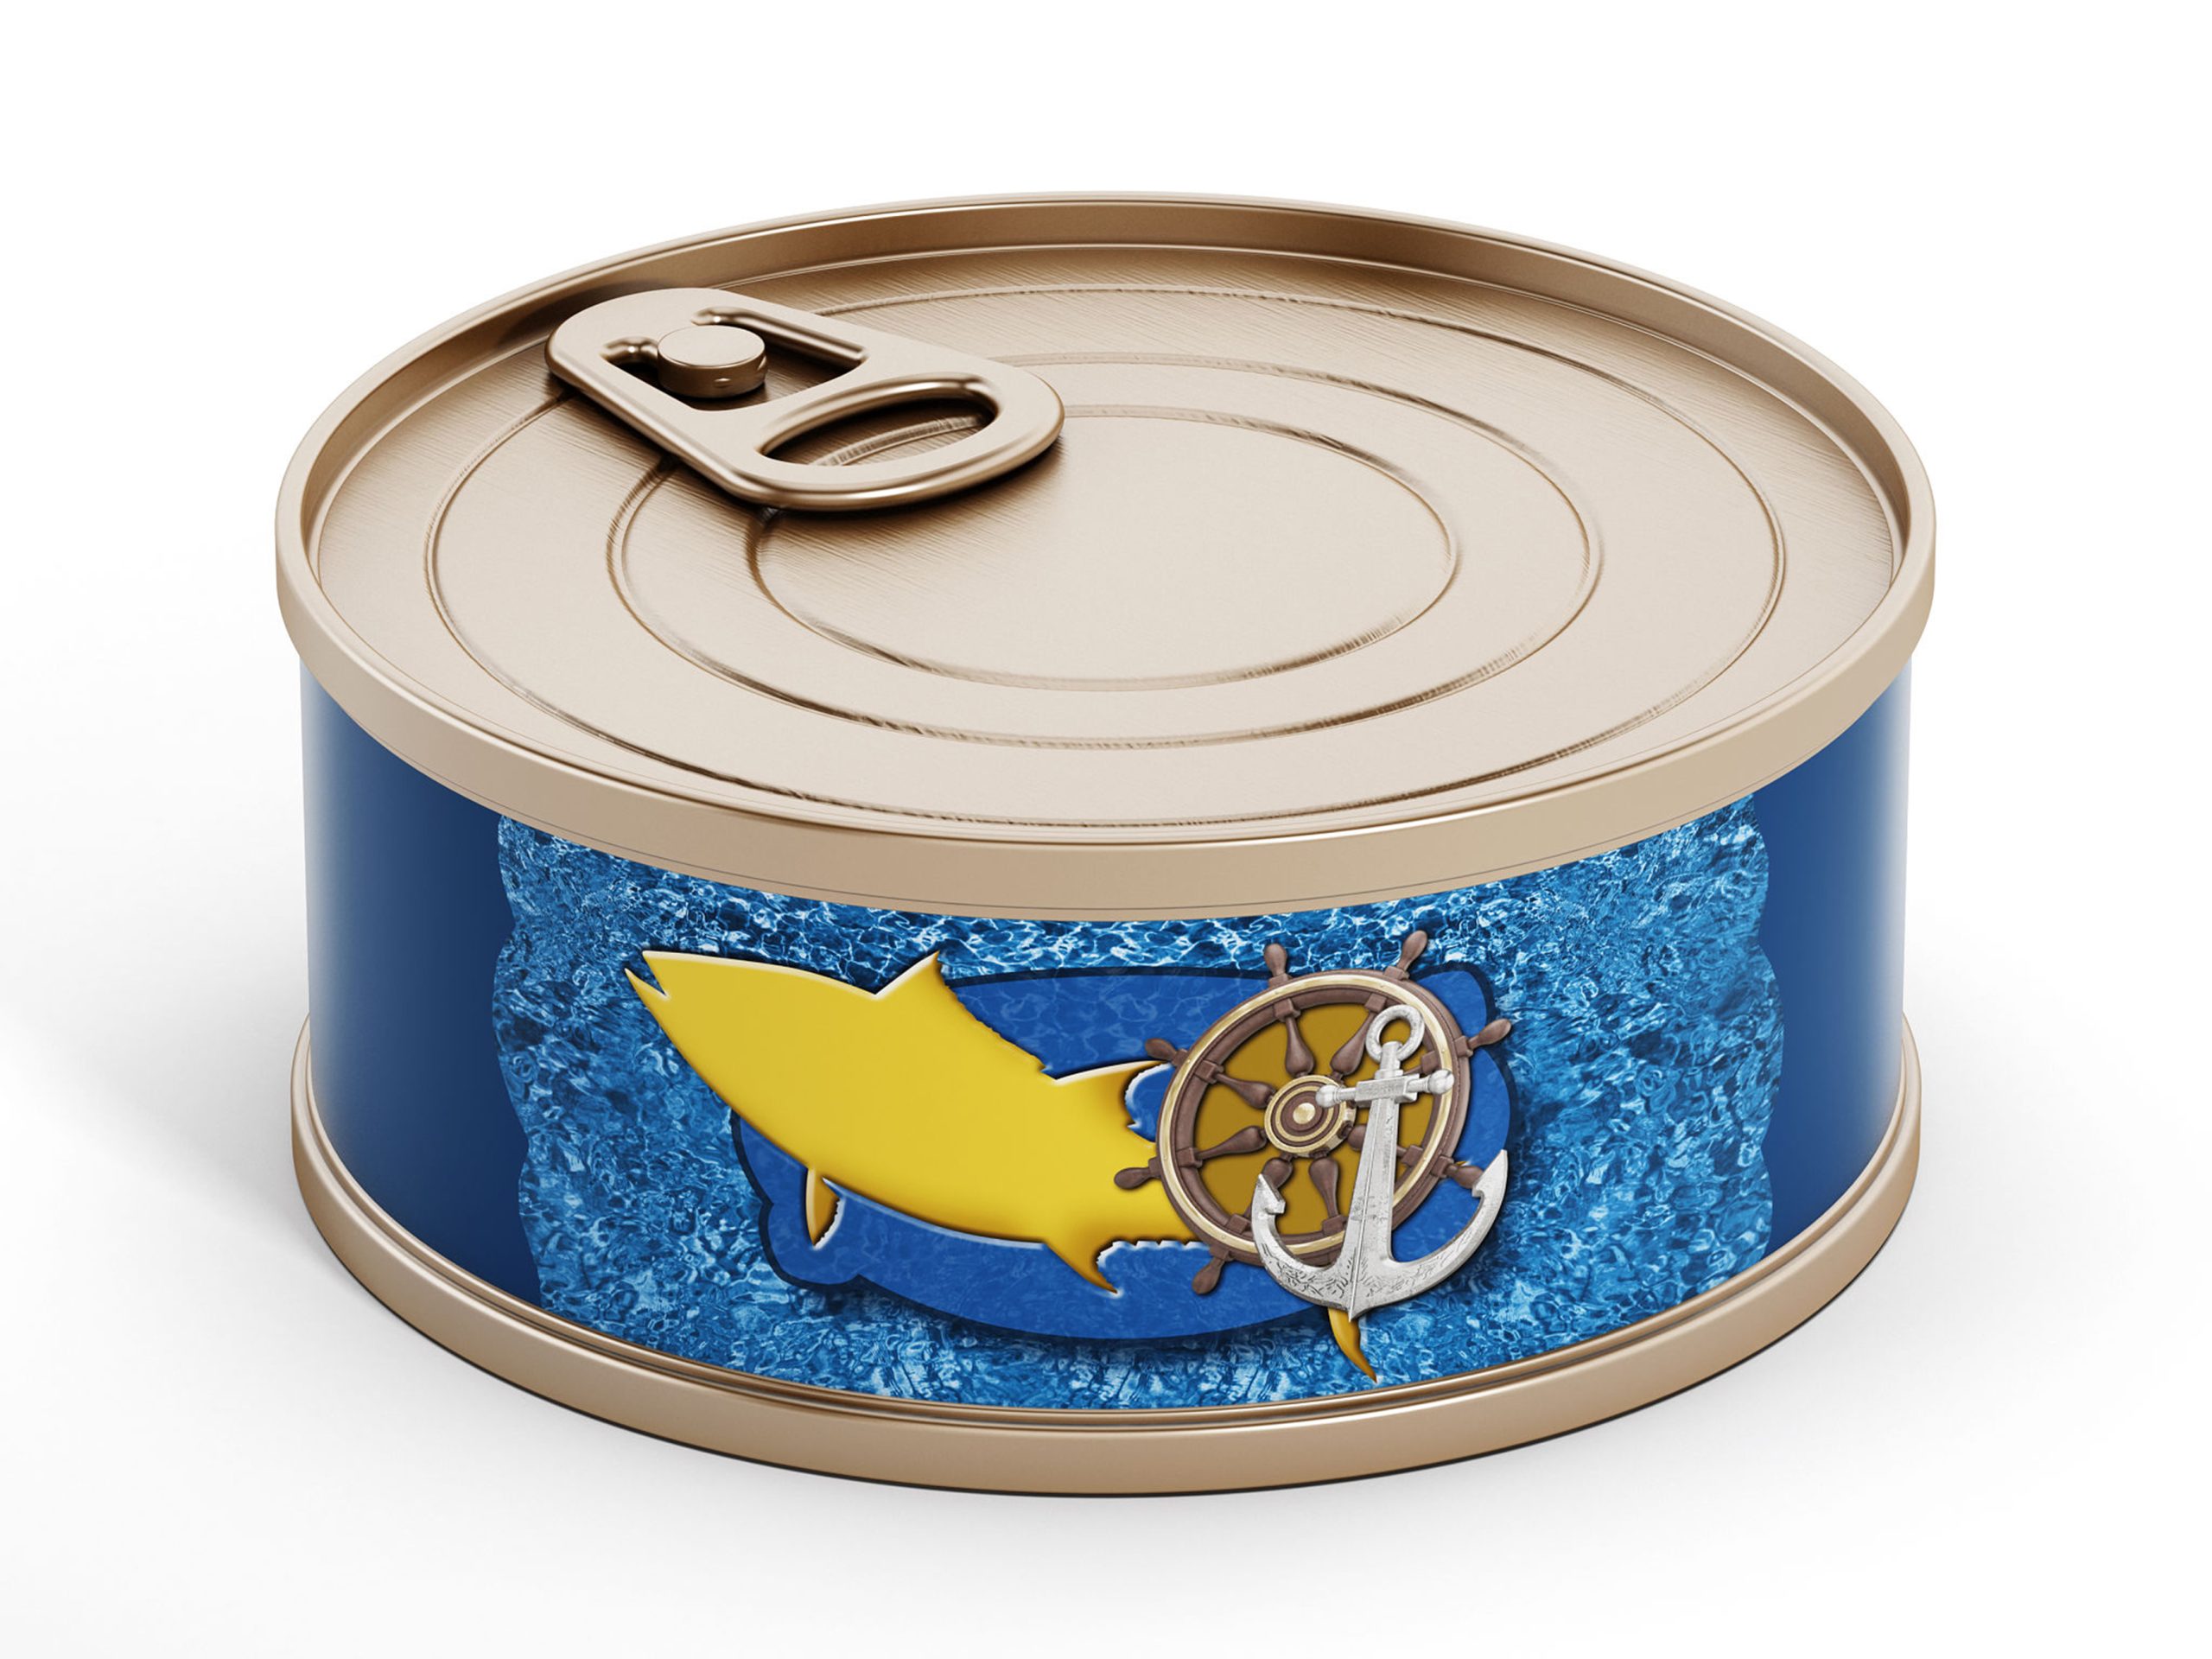 What country is known for canned fish?